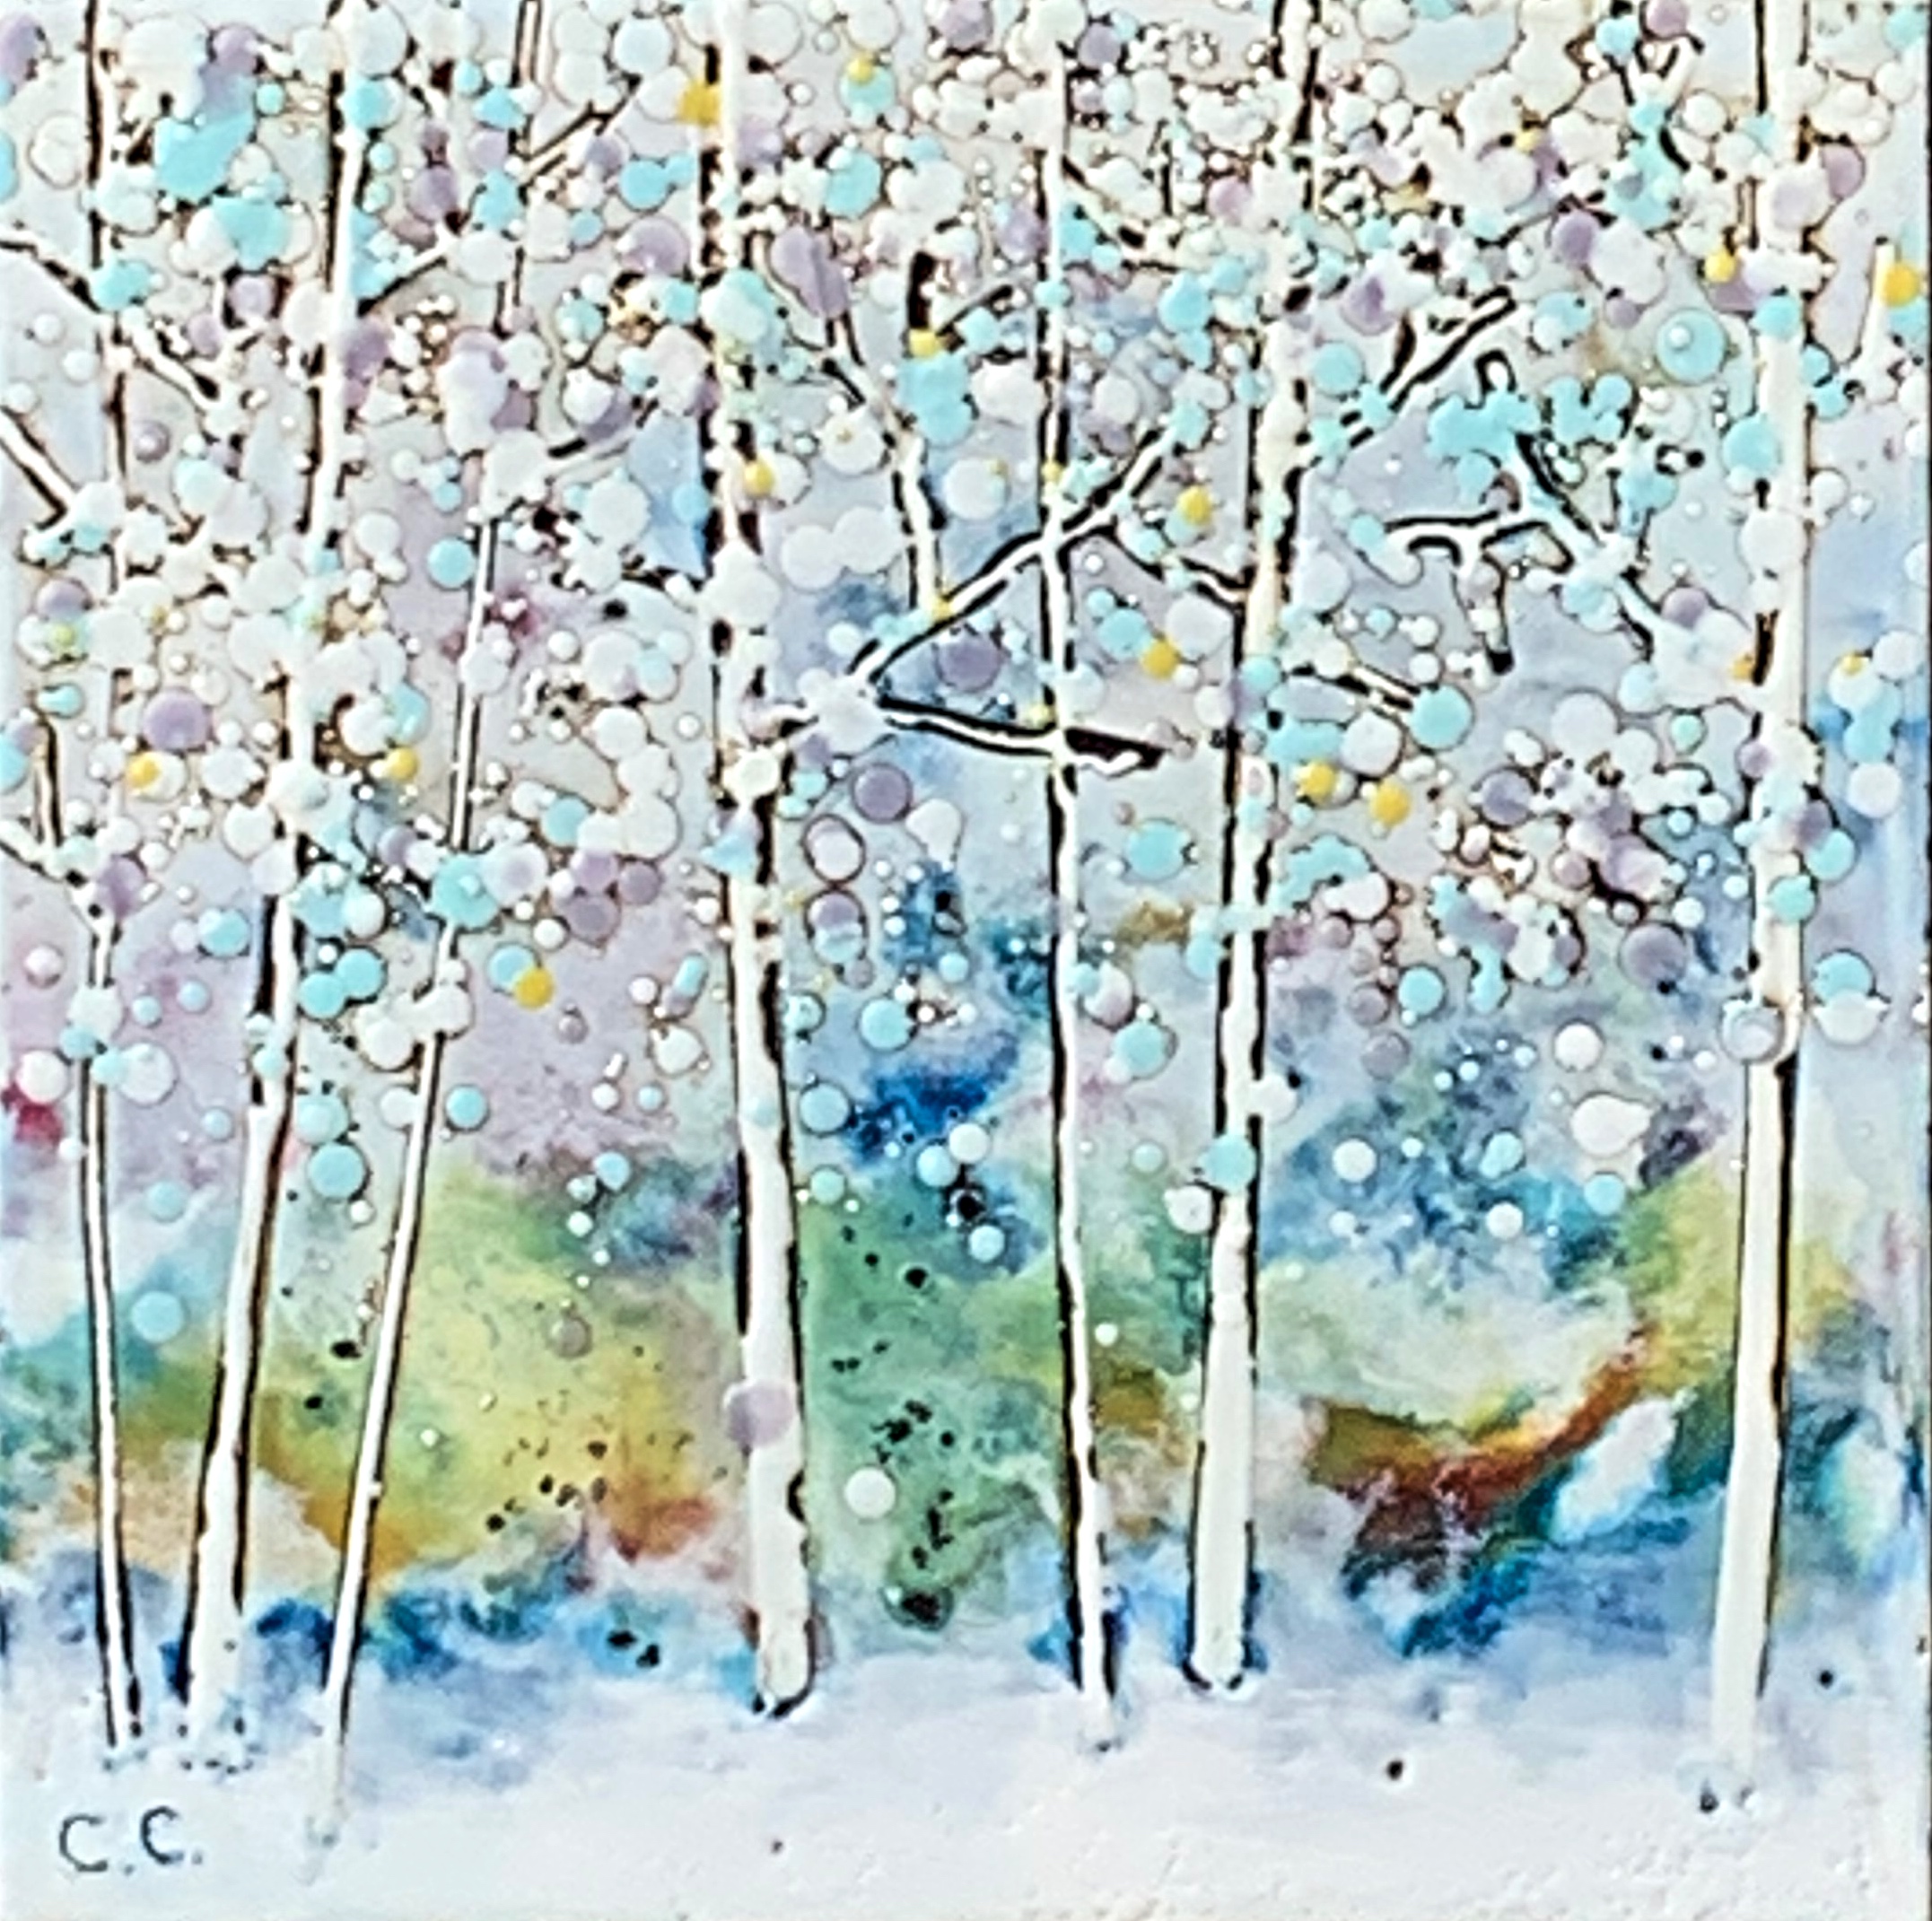 Winter Break, encaustic landscape painting by Catharine Clarke | Effusion Art Gallery + Cast Glass Studio, Invermere BC